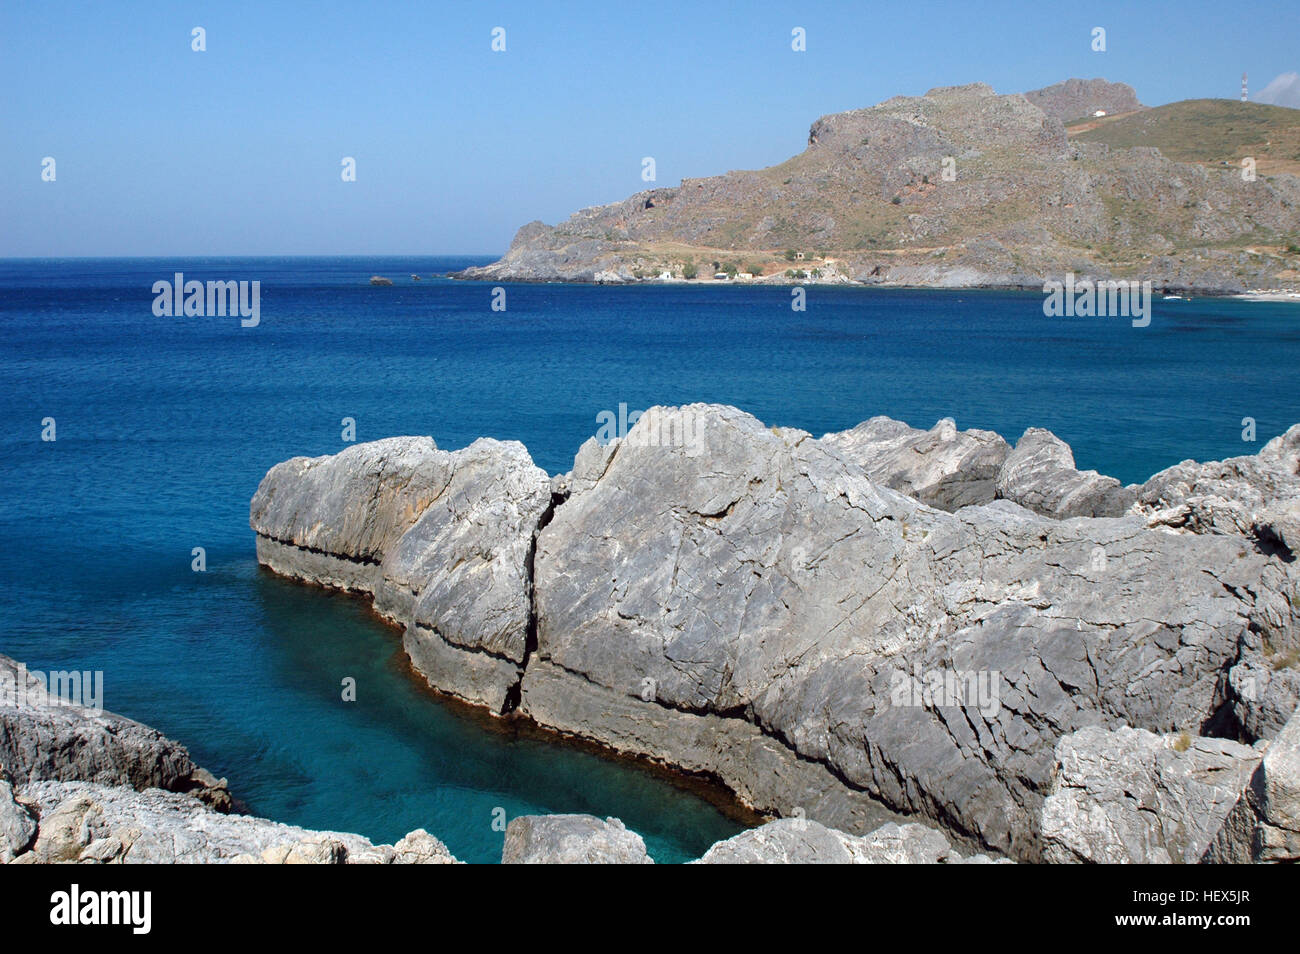 Uplifted coastal abrasion notch from the AD 365  Mediterranean earthquake, preserved on a limestone headland protruding into Damnoni Bay, Crete Greece Stock Photo